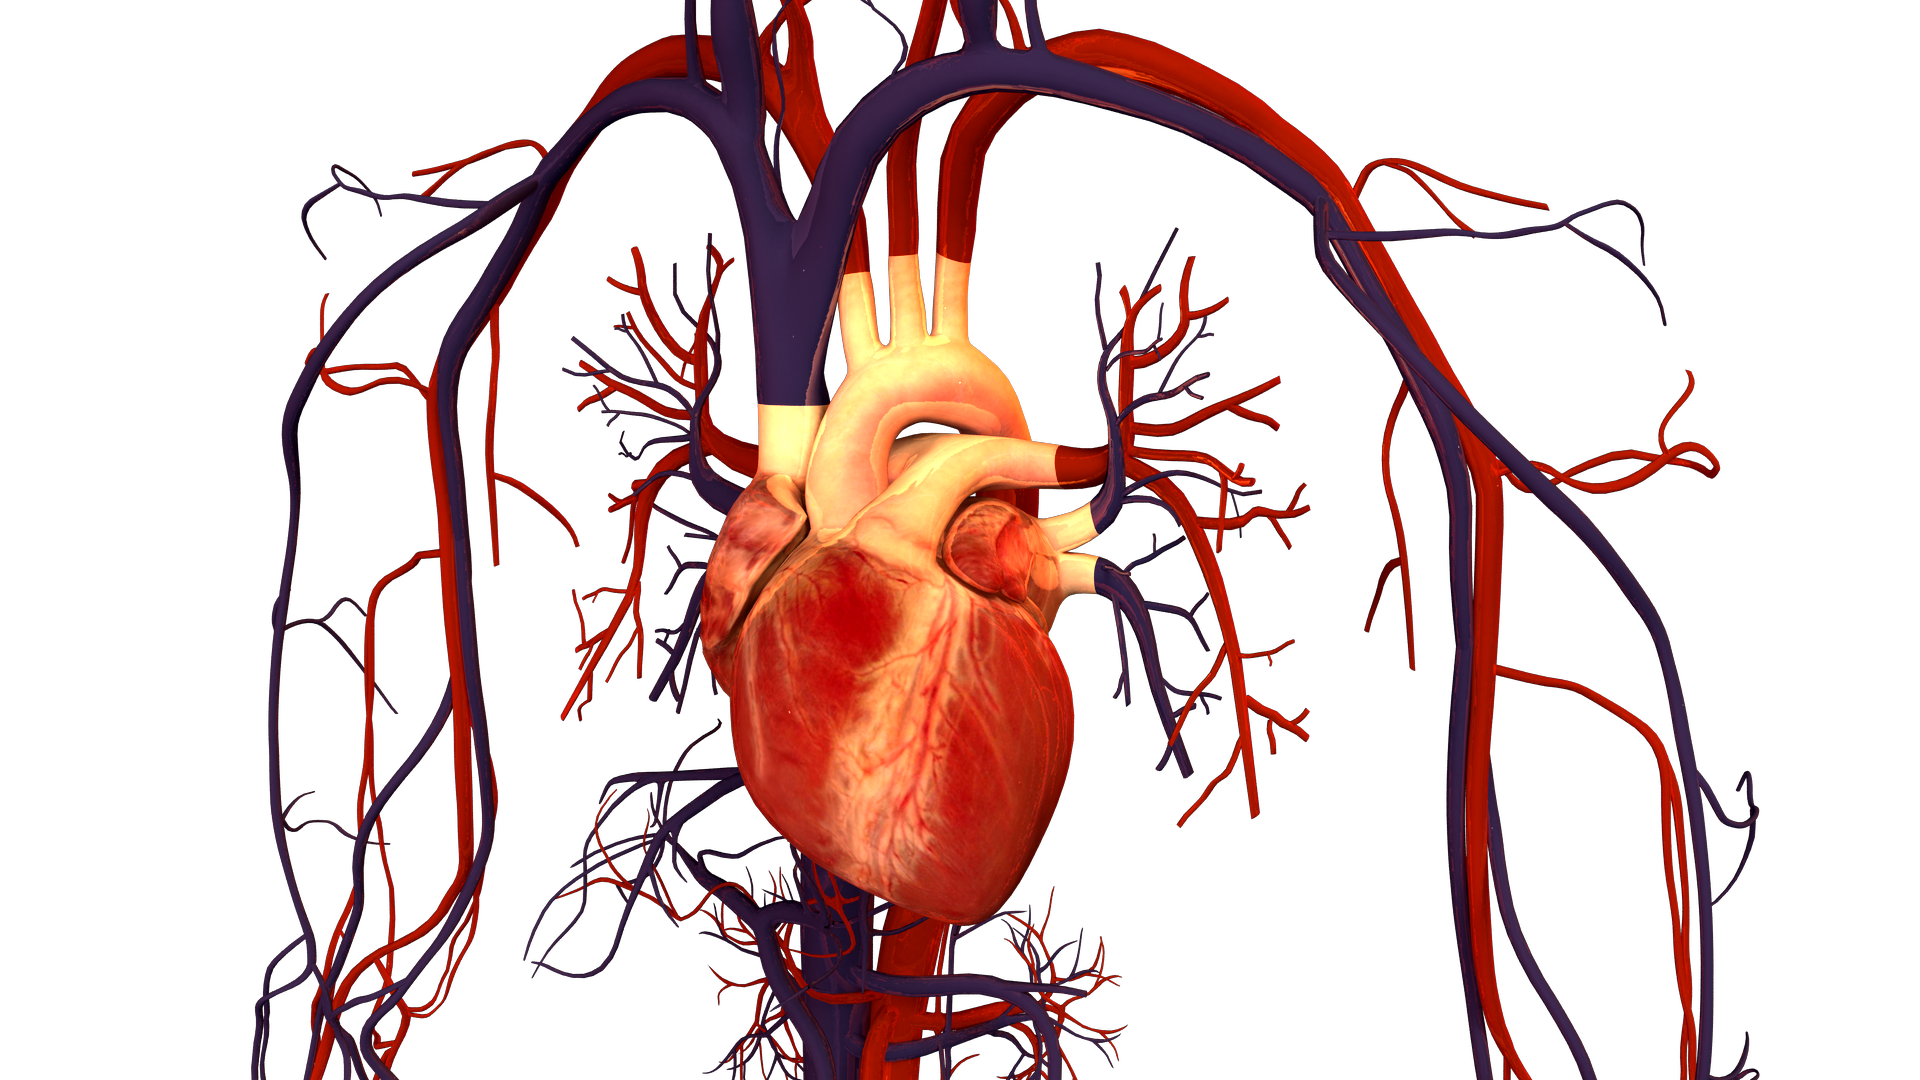 File:Human Heart and Circulatory System - Wikimedia Commons